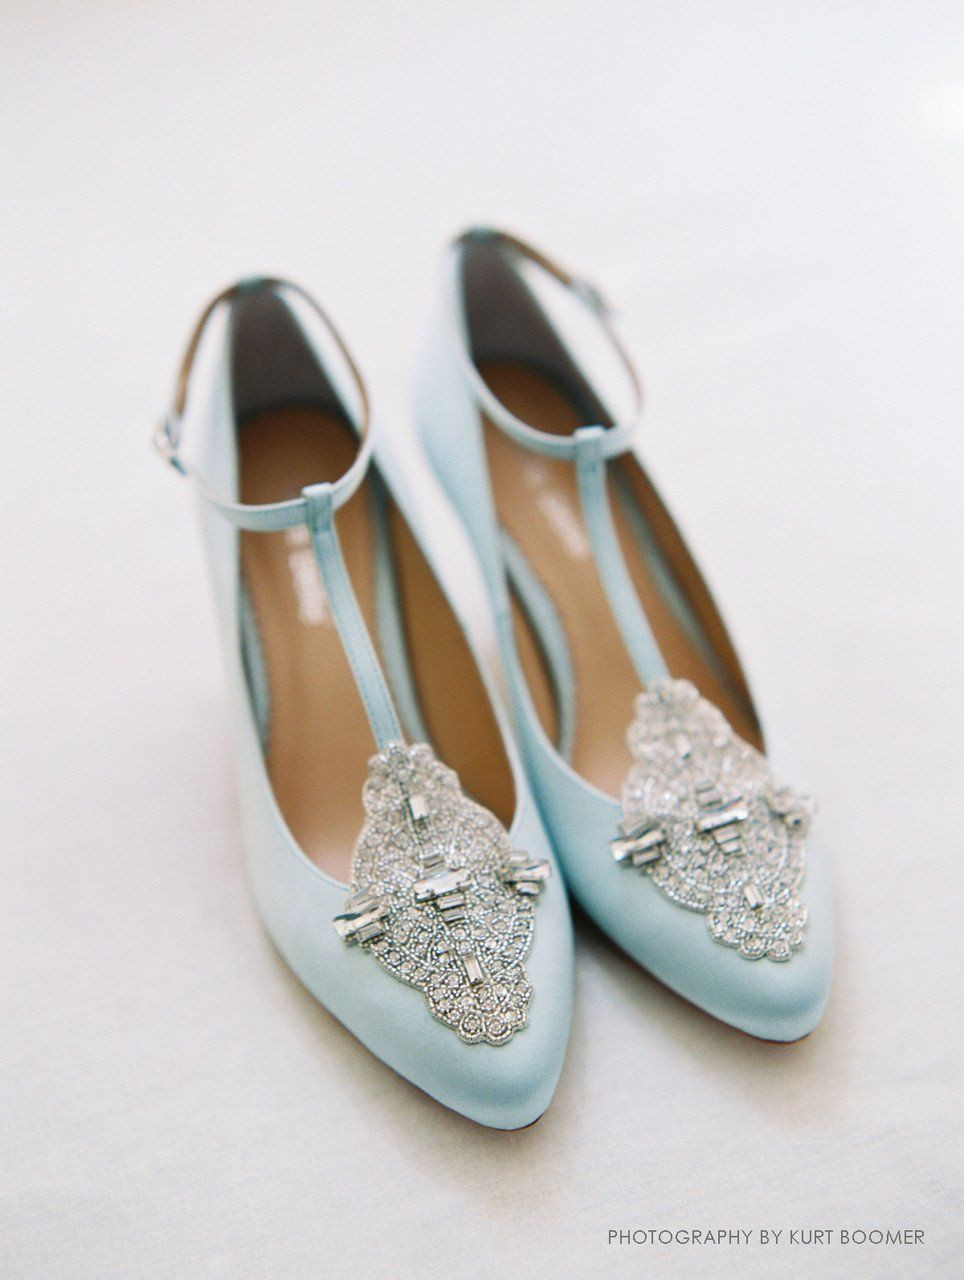 Vintage Wedding Shoes For Sale
 Something Blue Art Deco Wedding Shoes in 2019